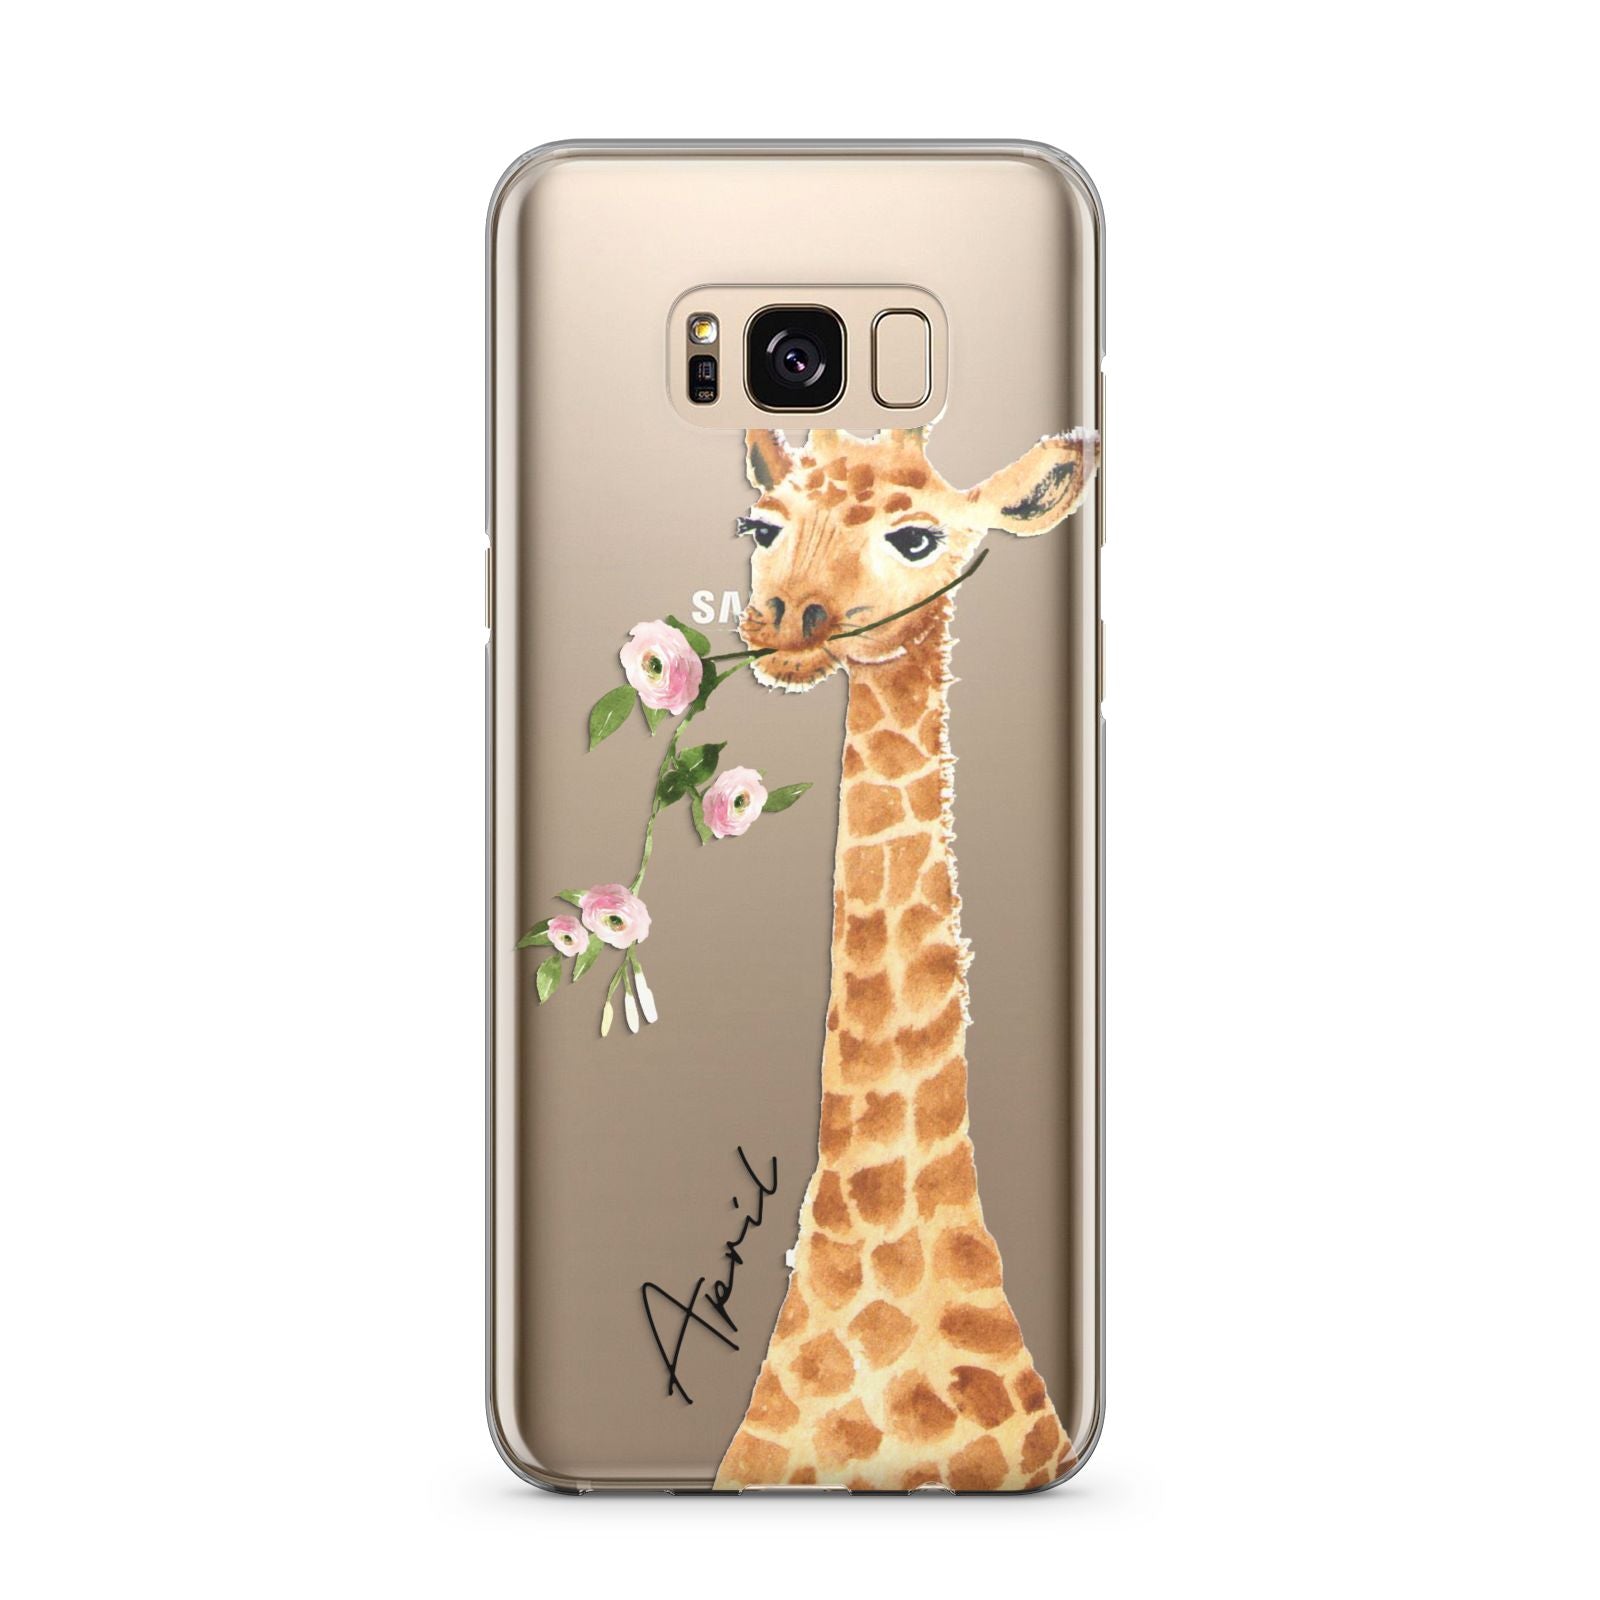 Personalised Giraffe with Name Samsung Galaxy S8 Plus Case